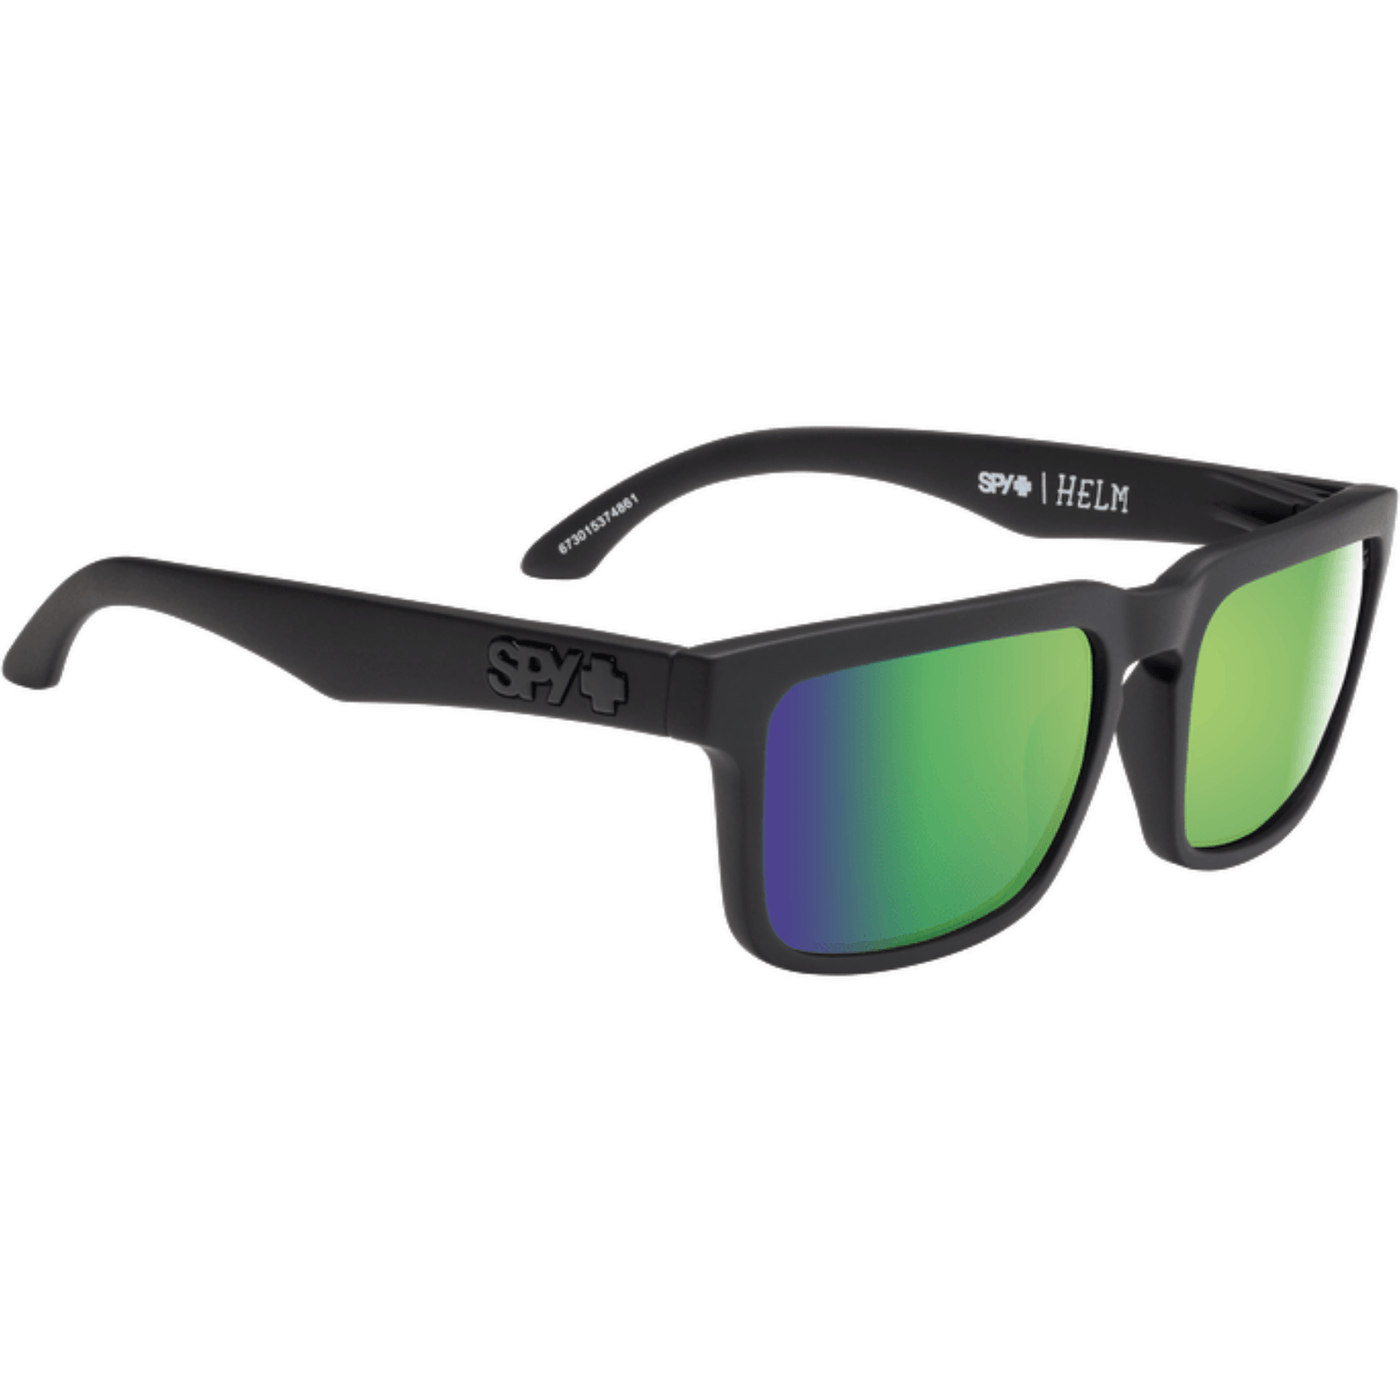 SPY HELM Polarized Sunglasses, Happy Lens - Green 8Lines Shop - Fast Shipping